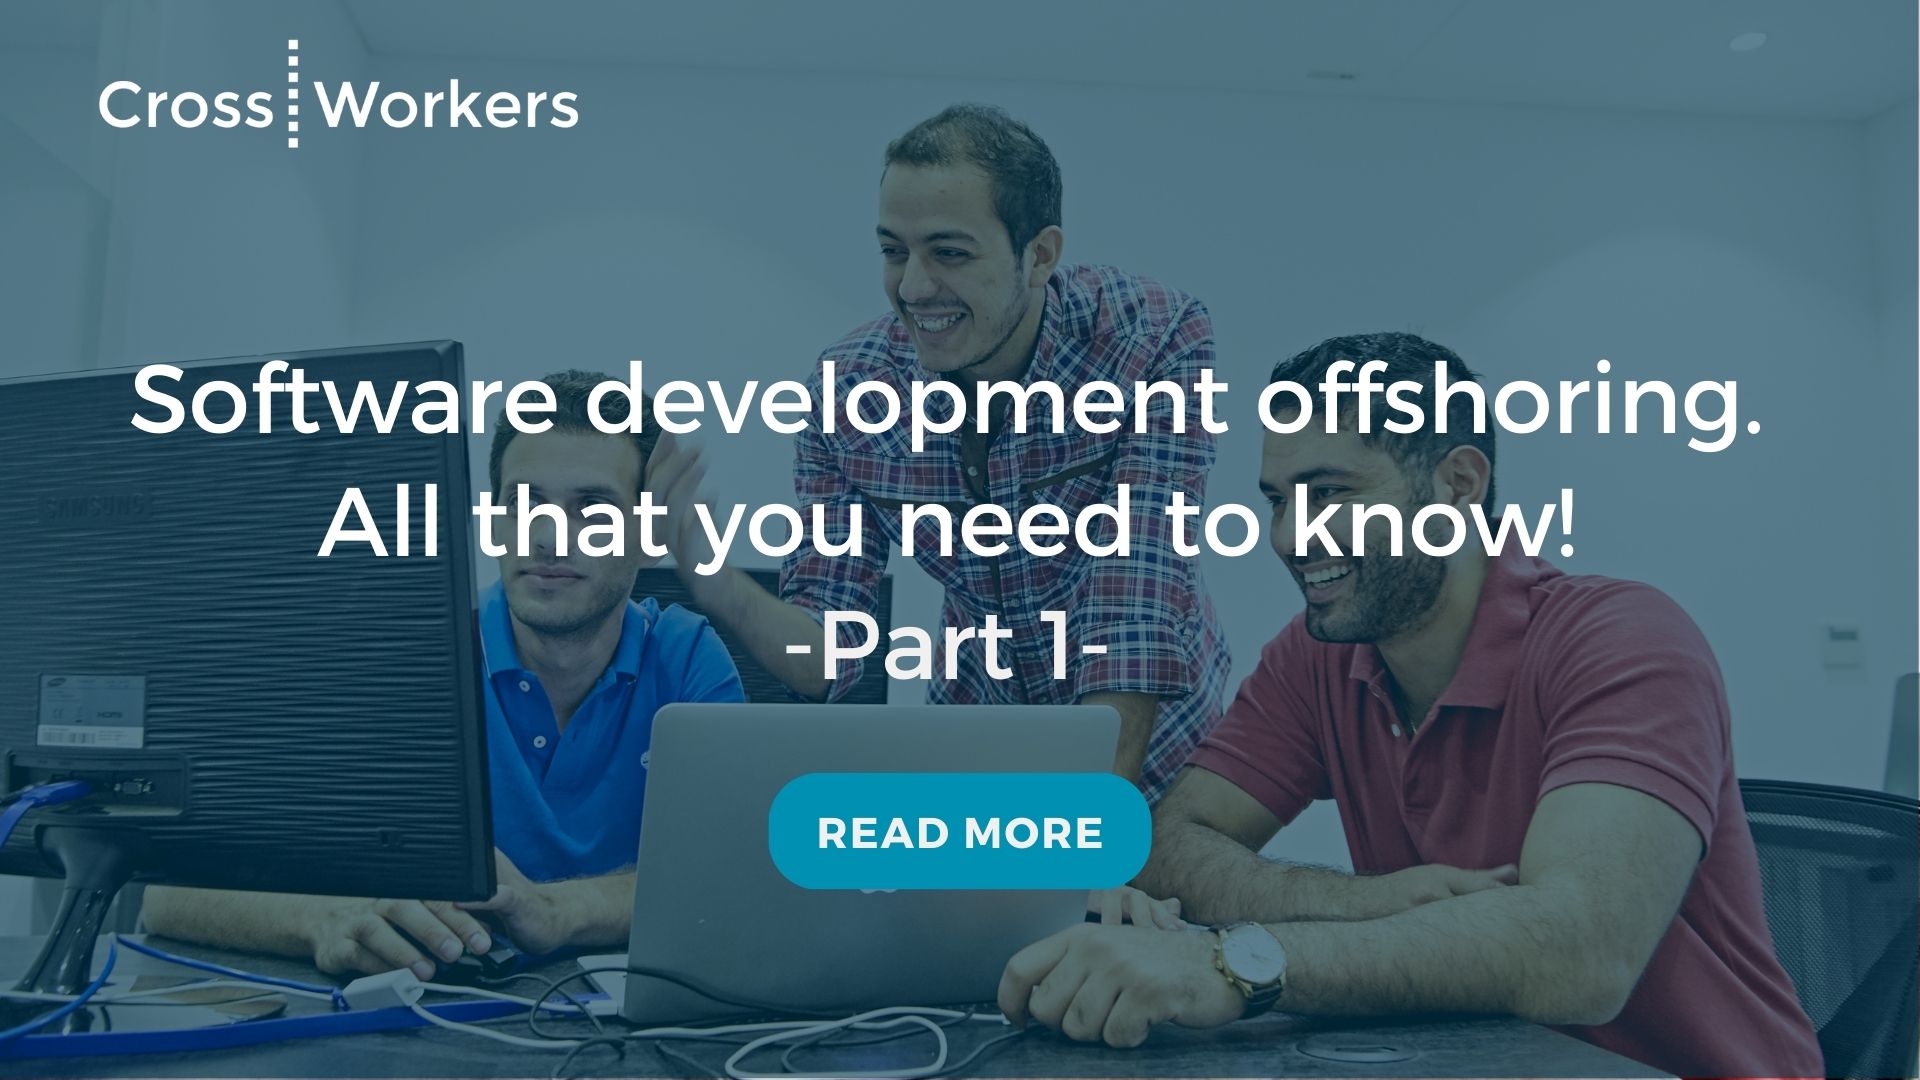 Software development offshoring. All that you need to know! Part 1